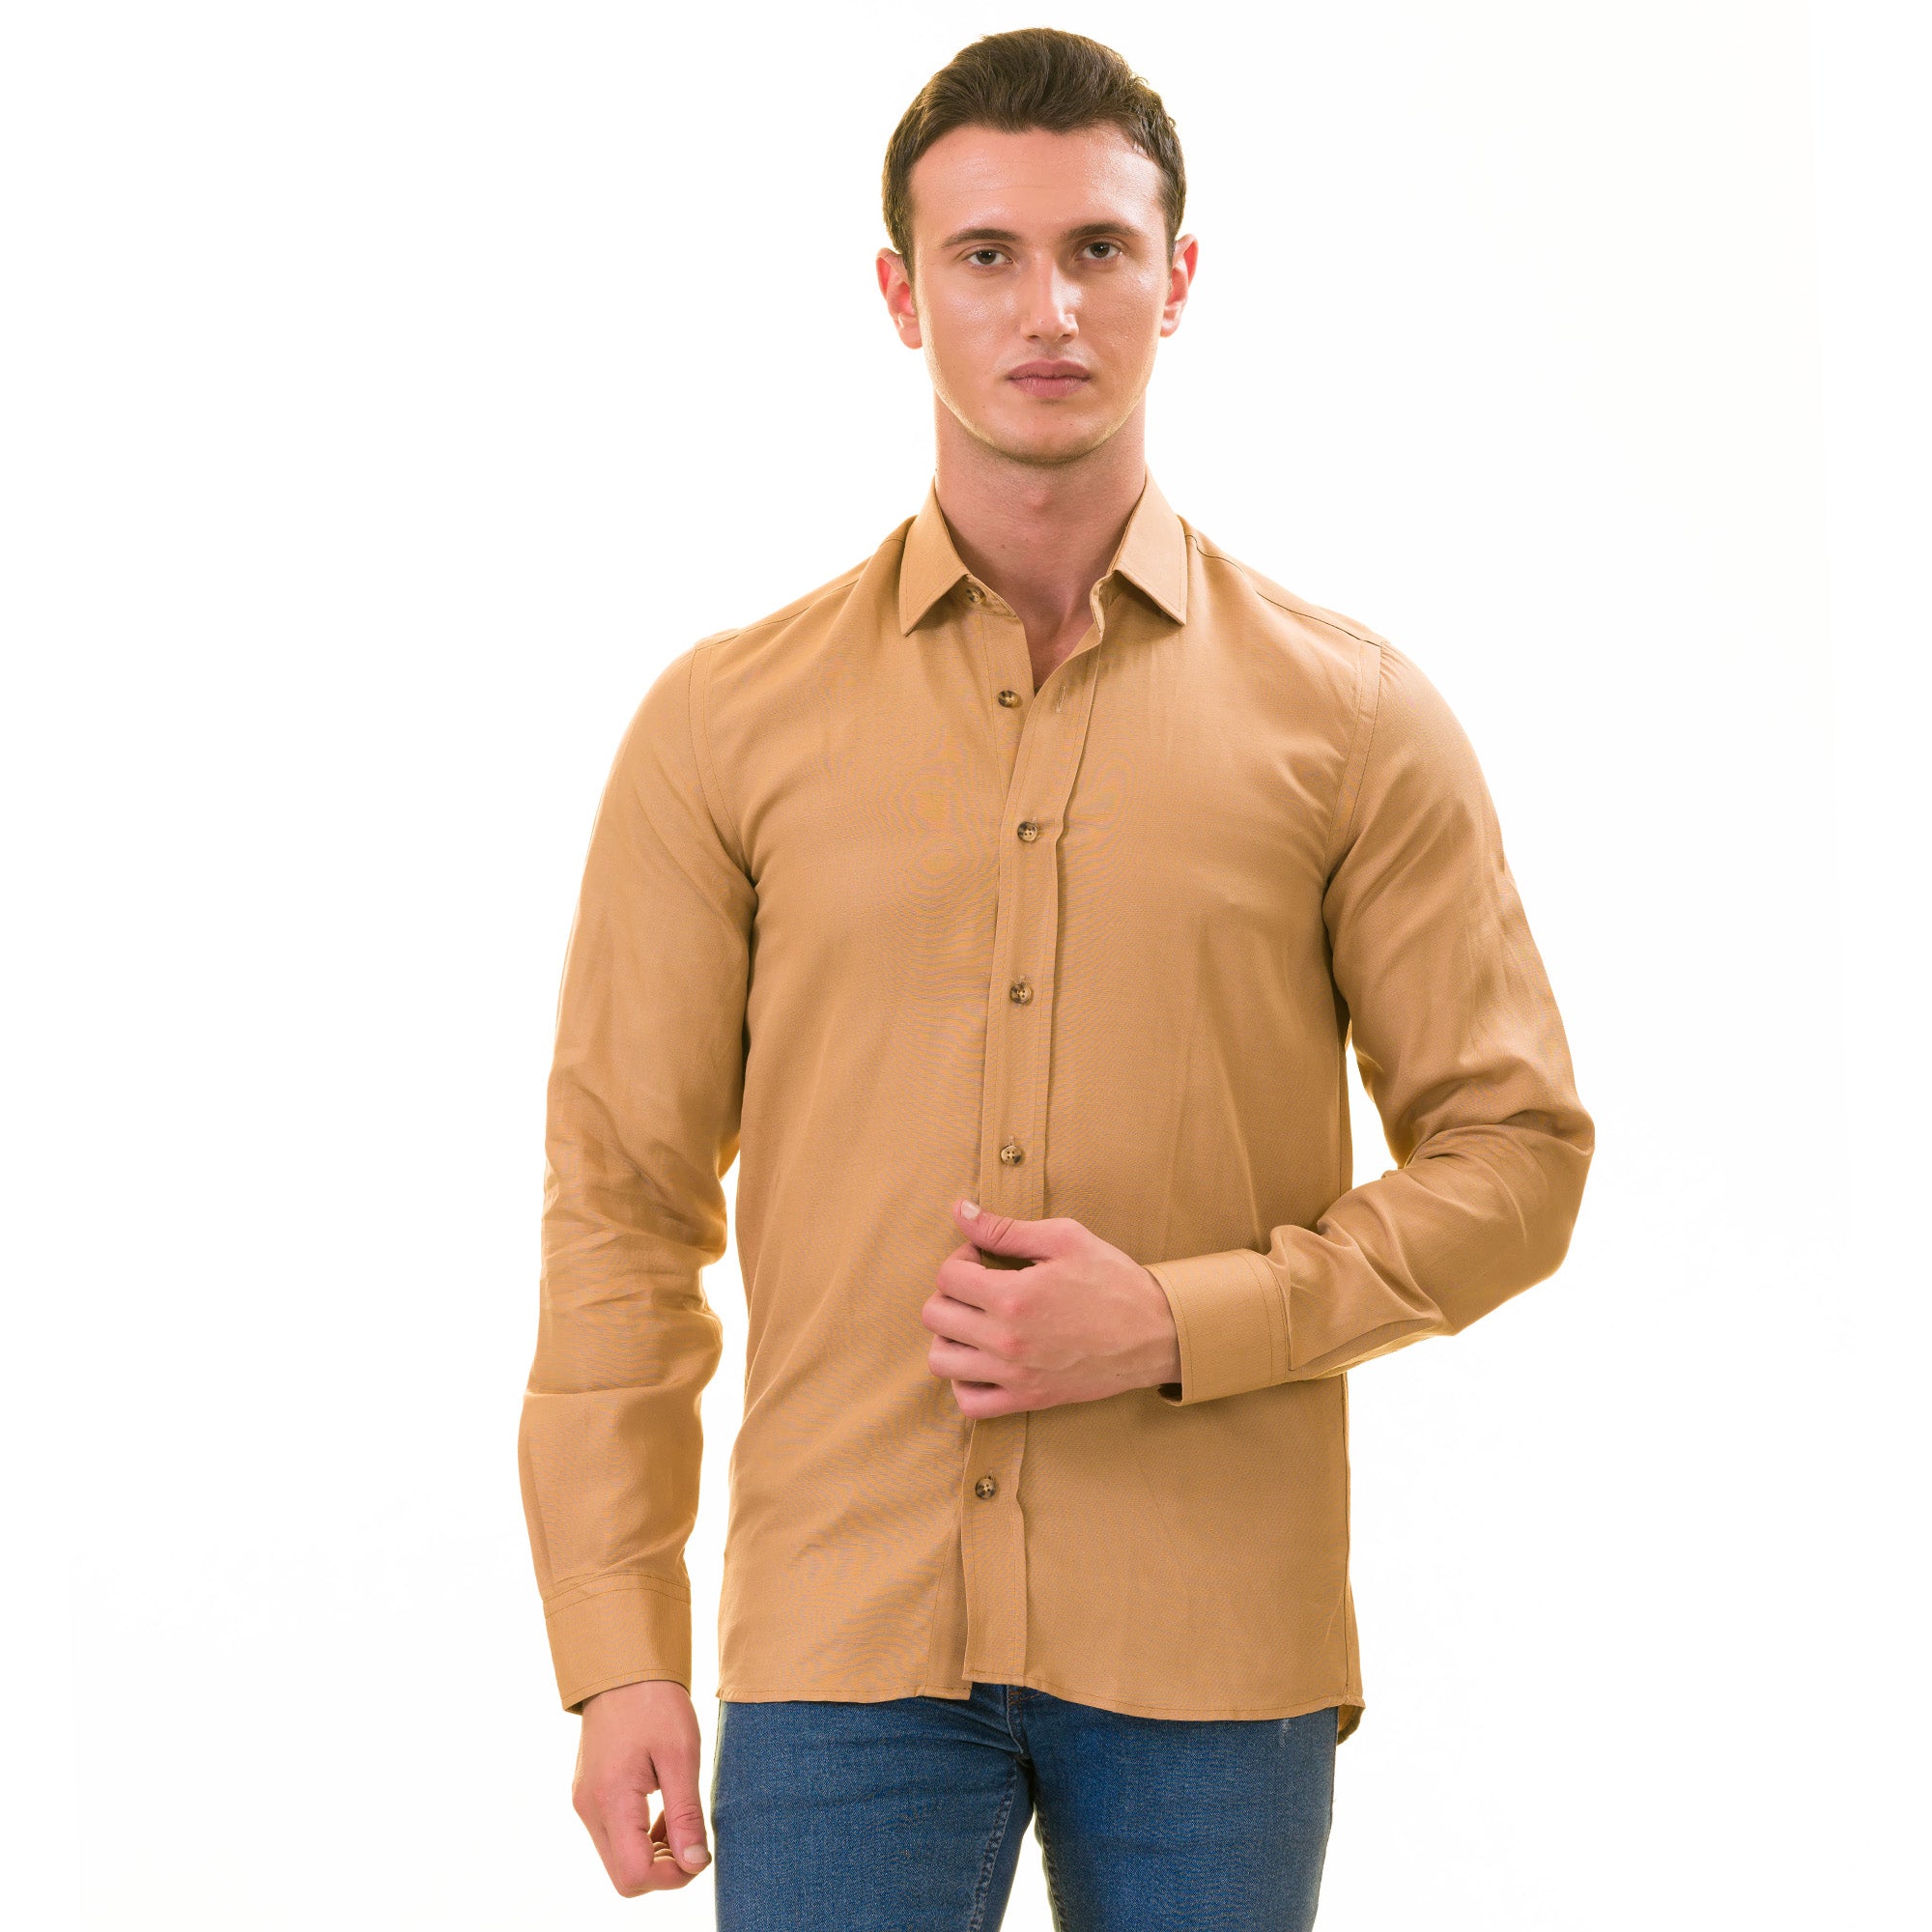 Brownish Luxury Men's Tailor Fit Button Up European Made Linen Shirts